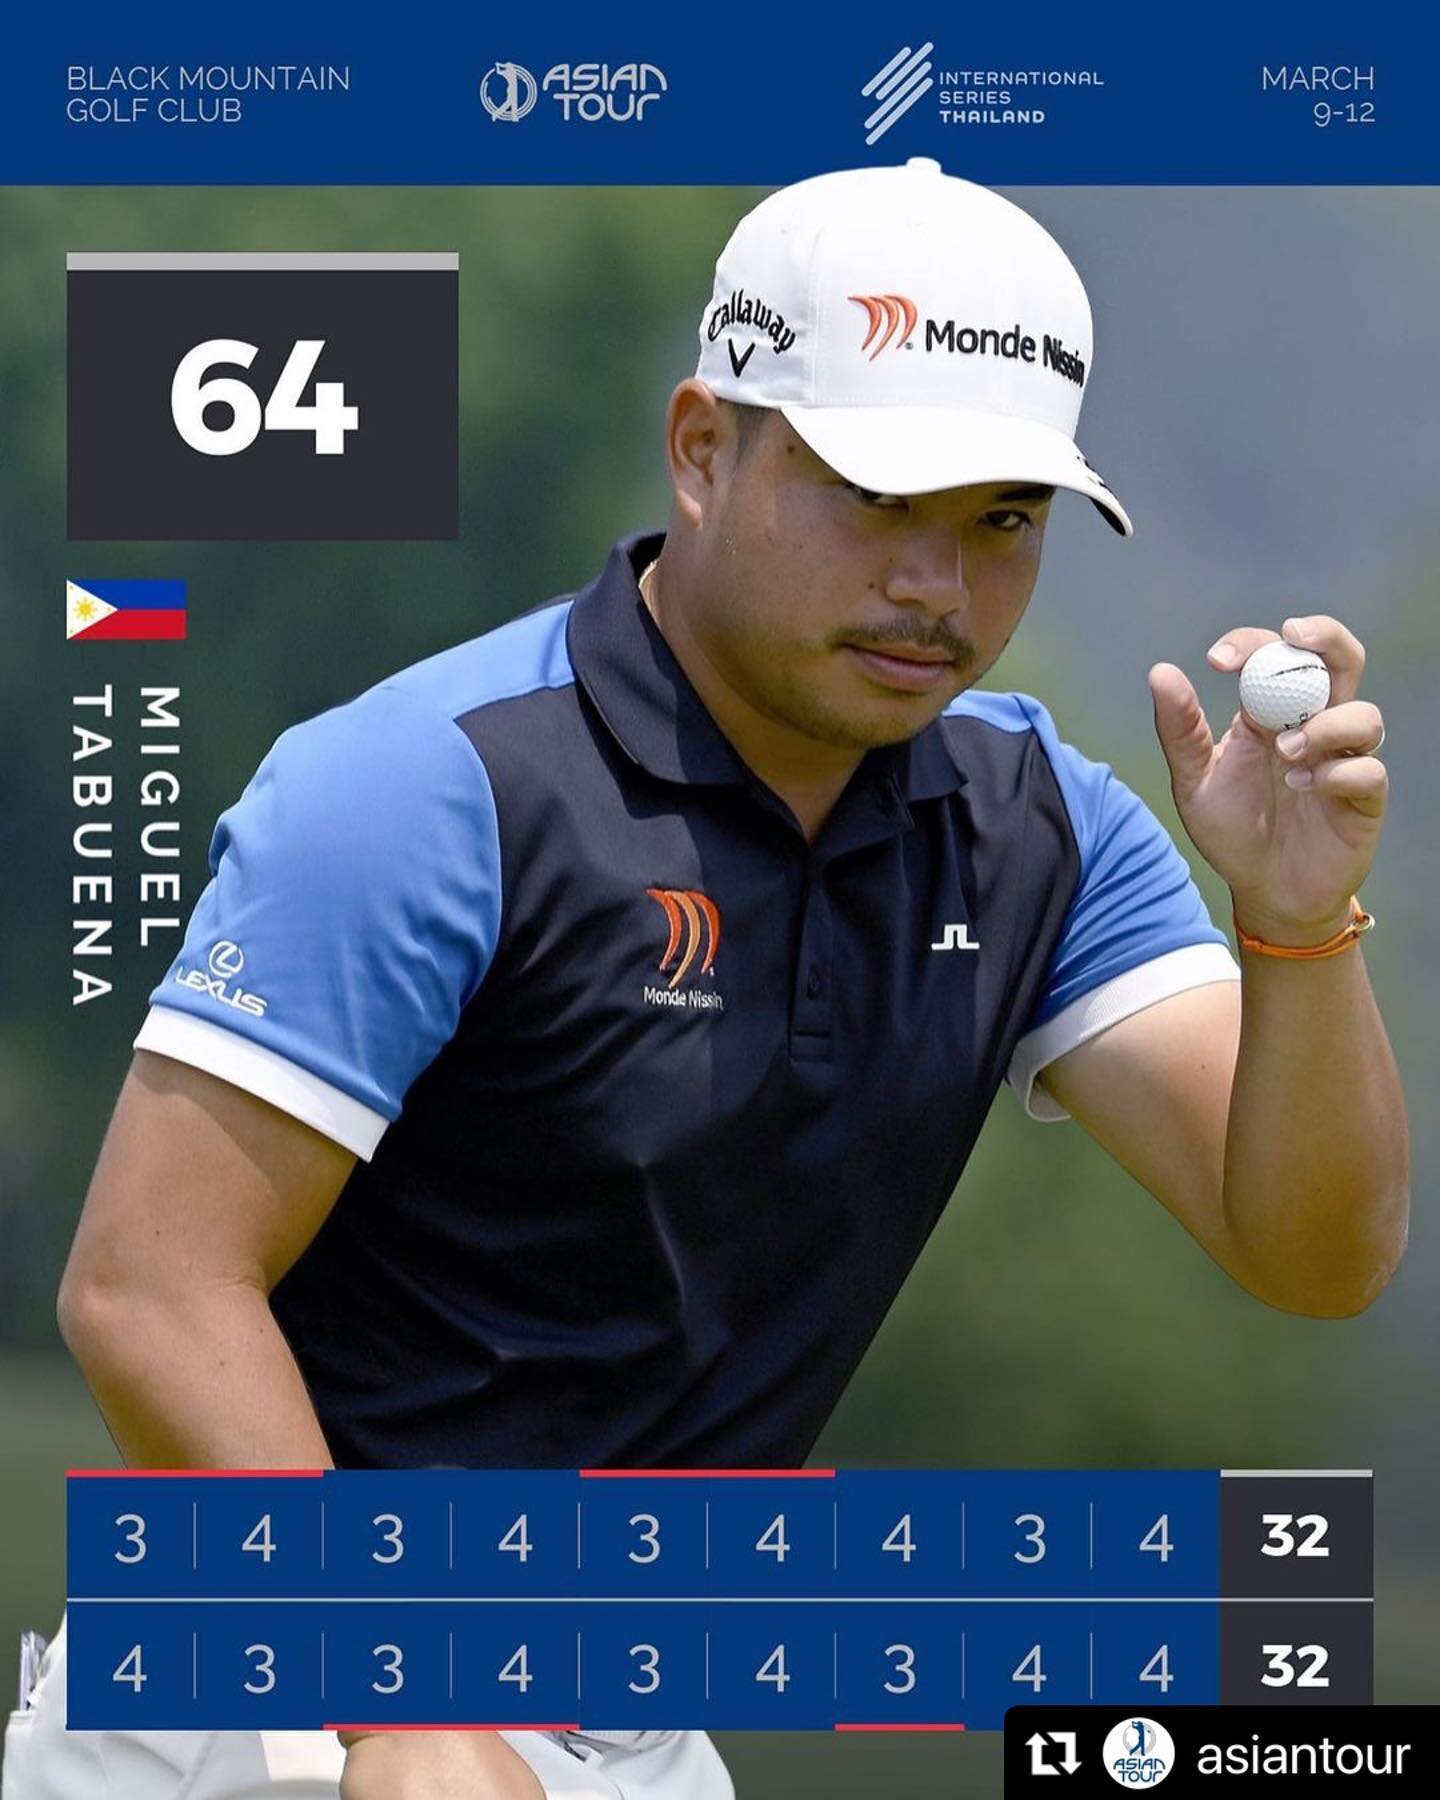 Miguel Tabuena fires 8 under in the opening round of the International Series Thailand to take an early lead 🔥

#Repost @asiantour